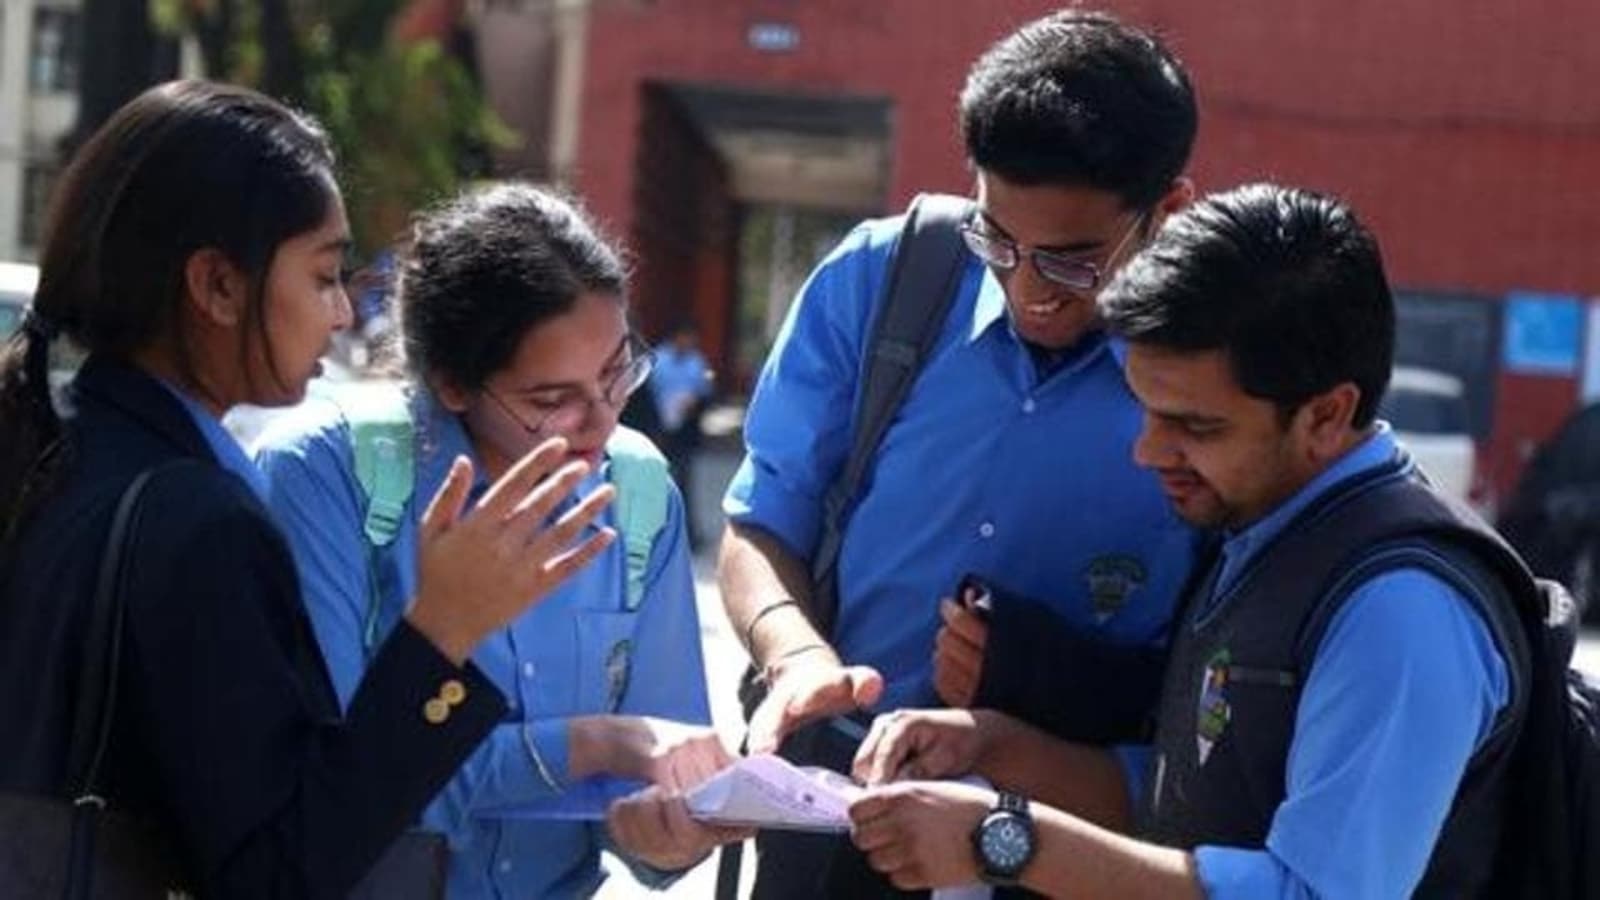 MP Board Results 2022 Live Updates: MPBSE 10th, 12th scores at mpresults.nic.in